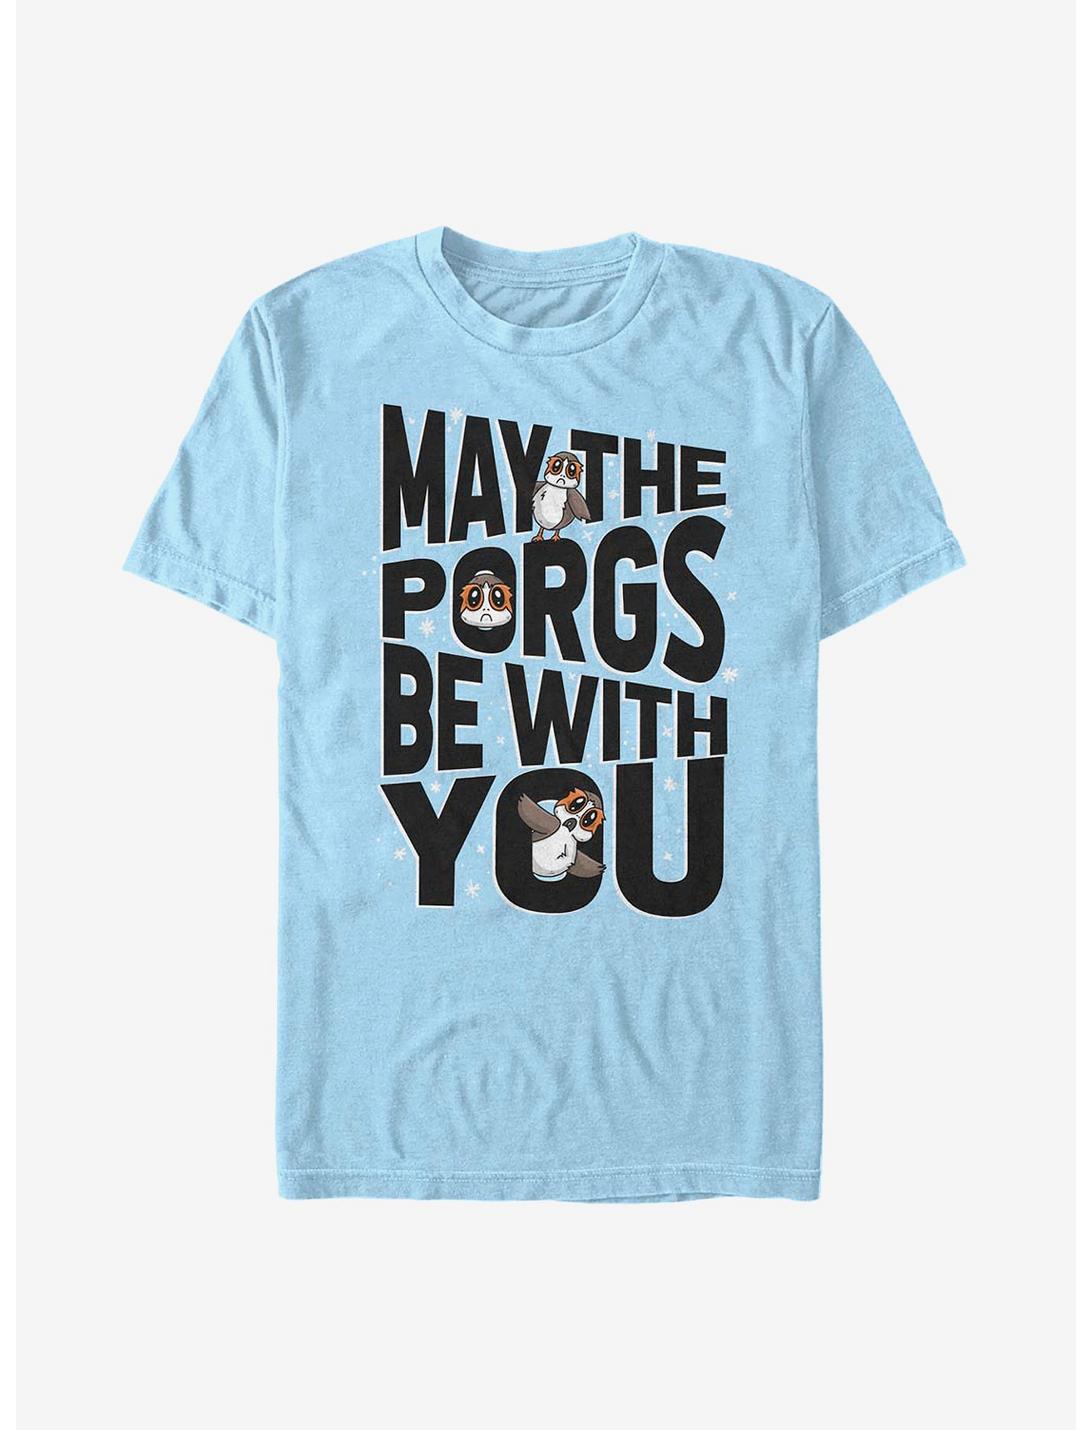 Star Wars: The Last Jedi Porgs Be With Us All T-Shirt, LT BLUE, hi-res